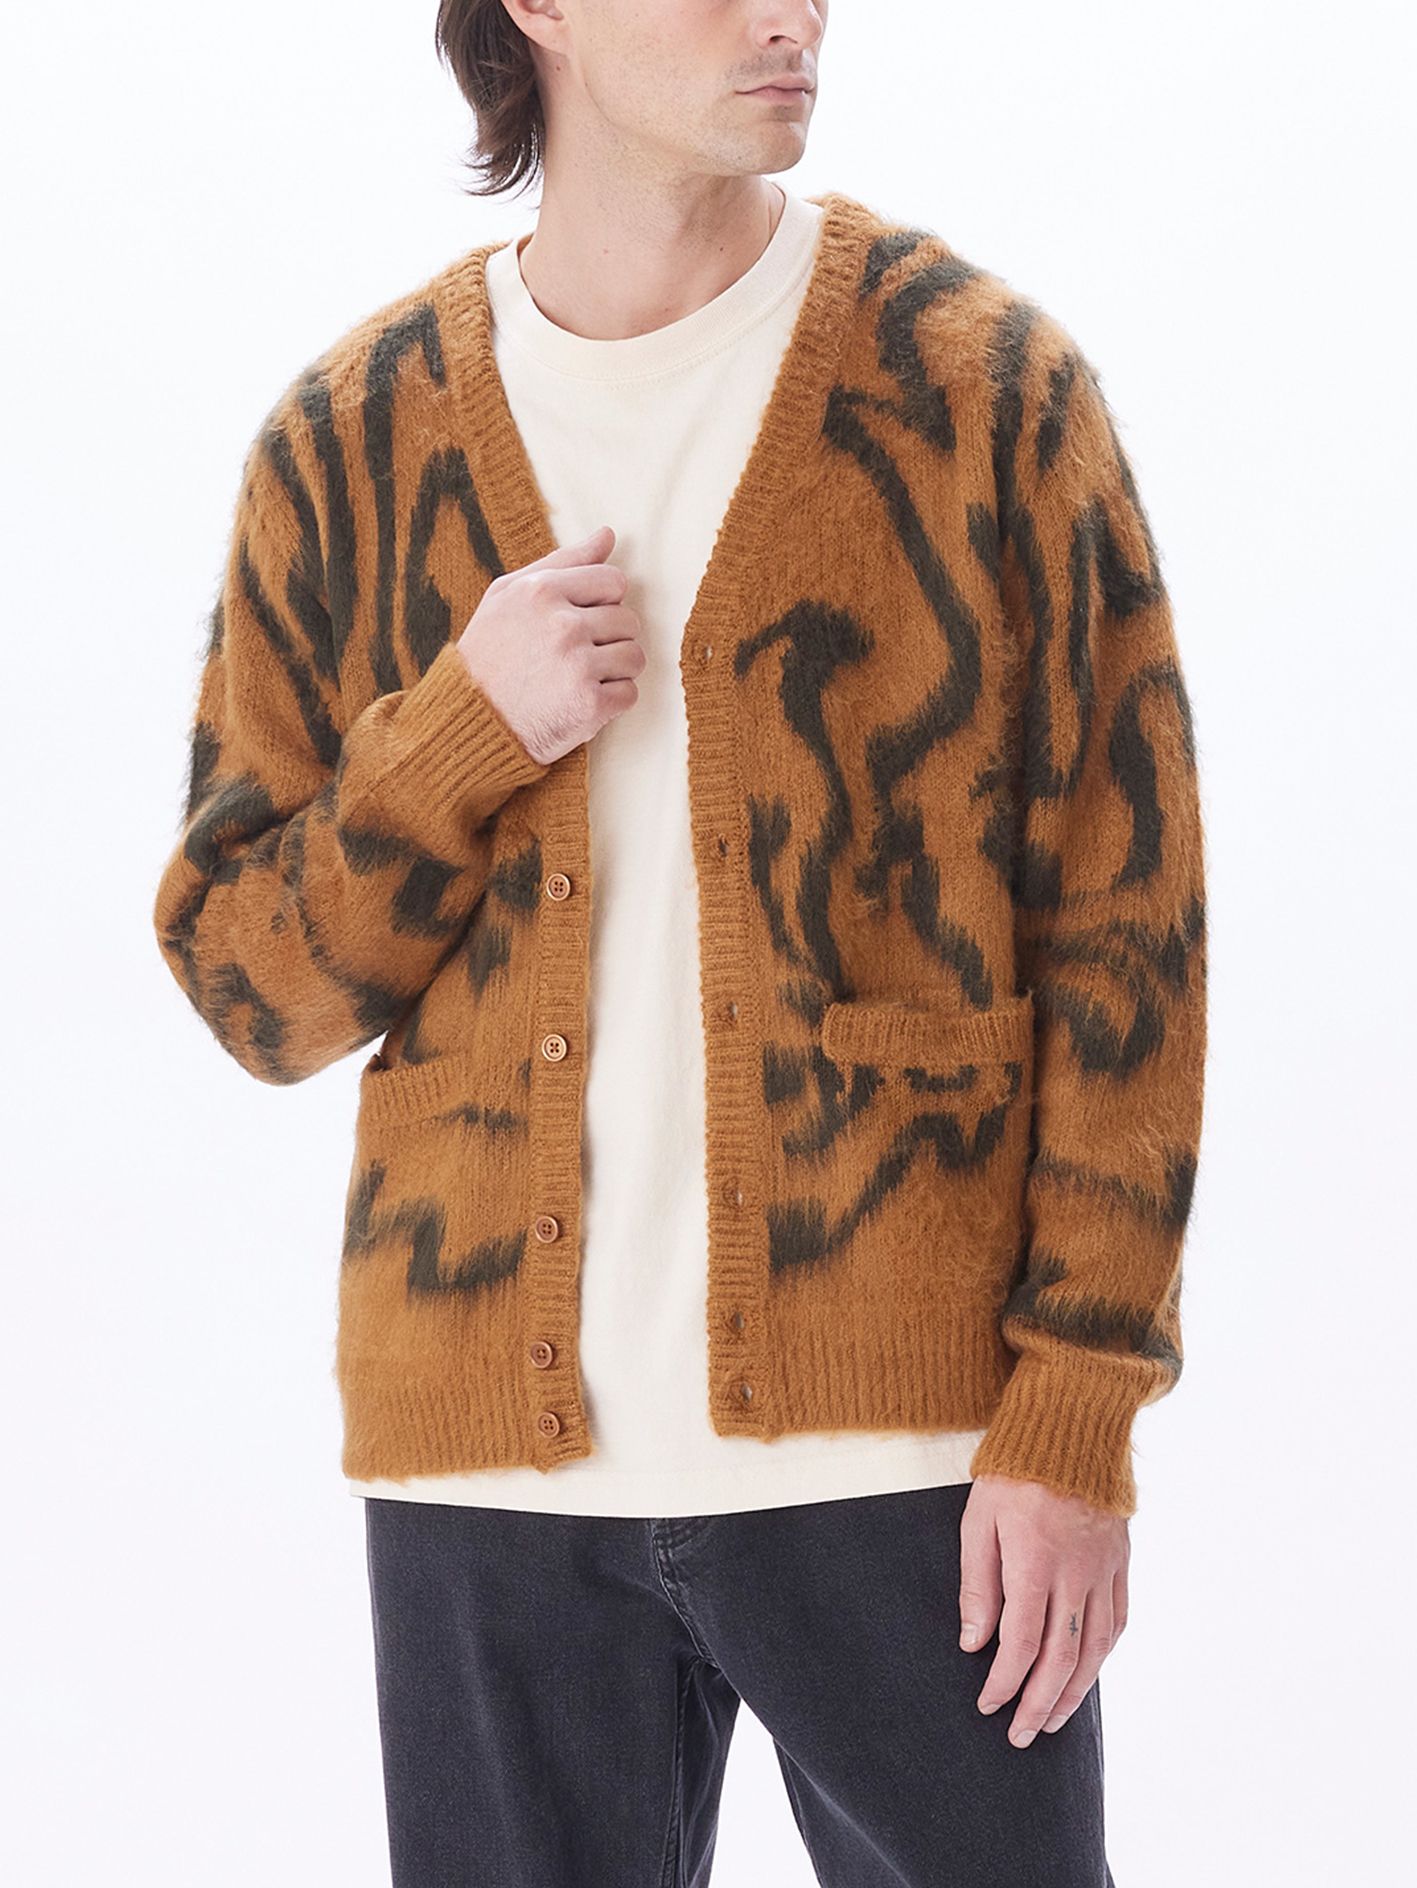 OBEY - 総柄 カーディガン - PALLY CARDIGAN - CATECHU WOOD